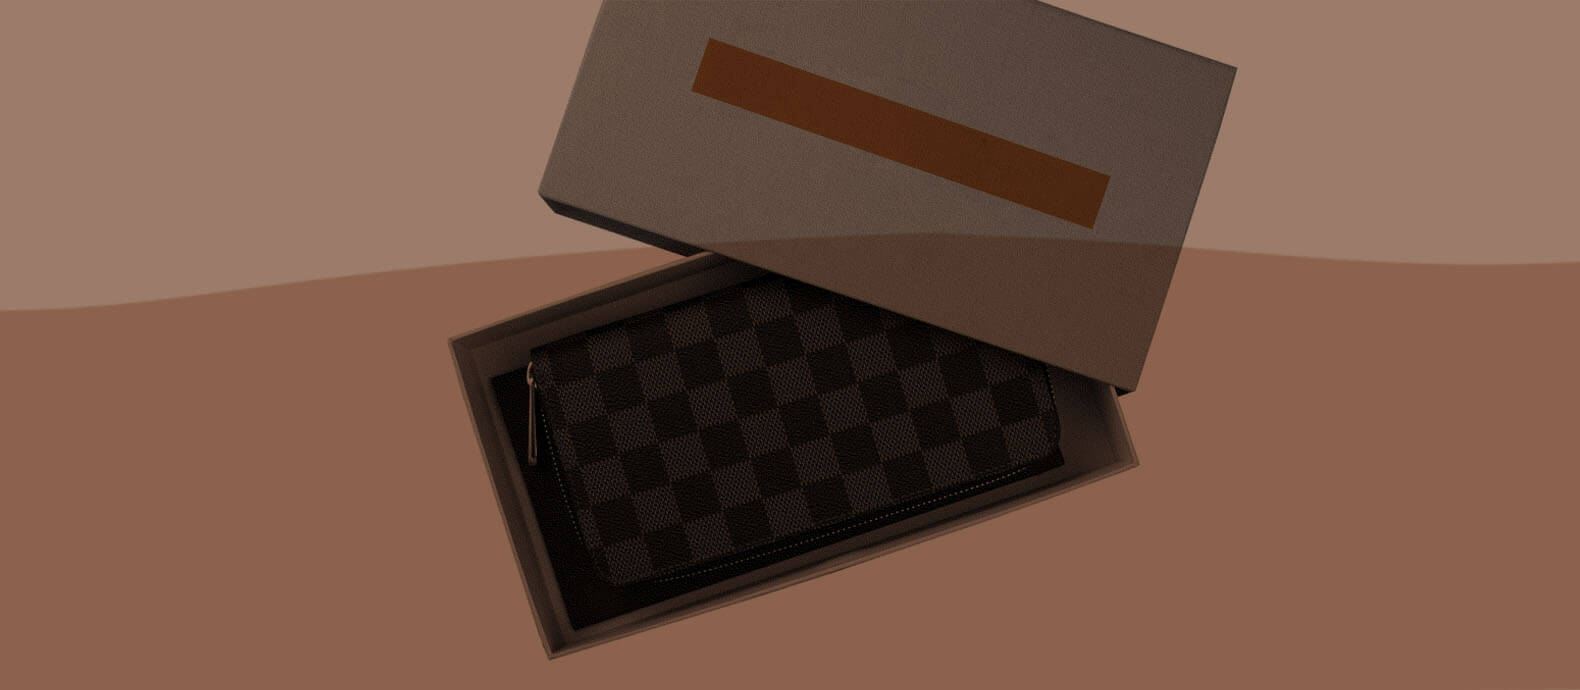 LV BUSINESS CARD HOLDER  First impression, overview + what fits  (underrated LV card holder/wallet?) 